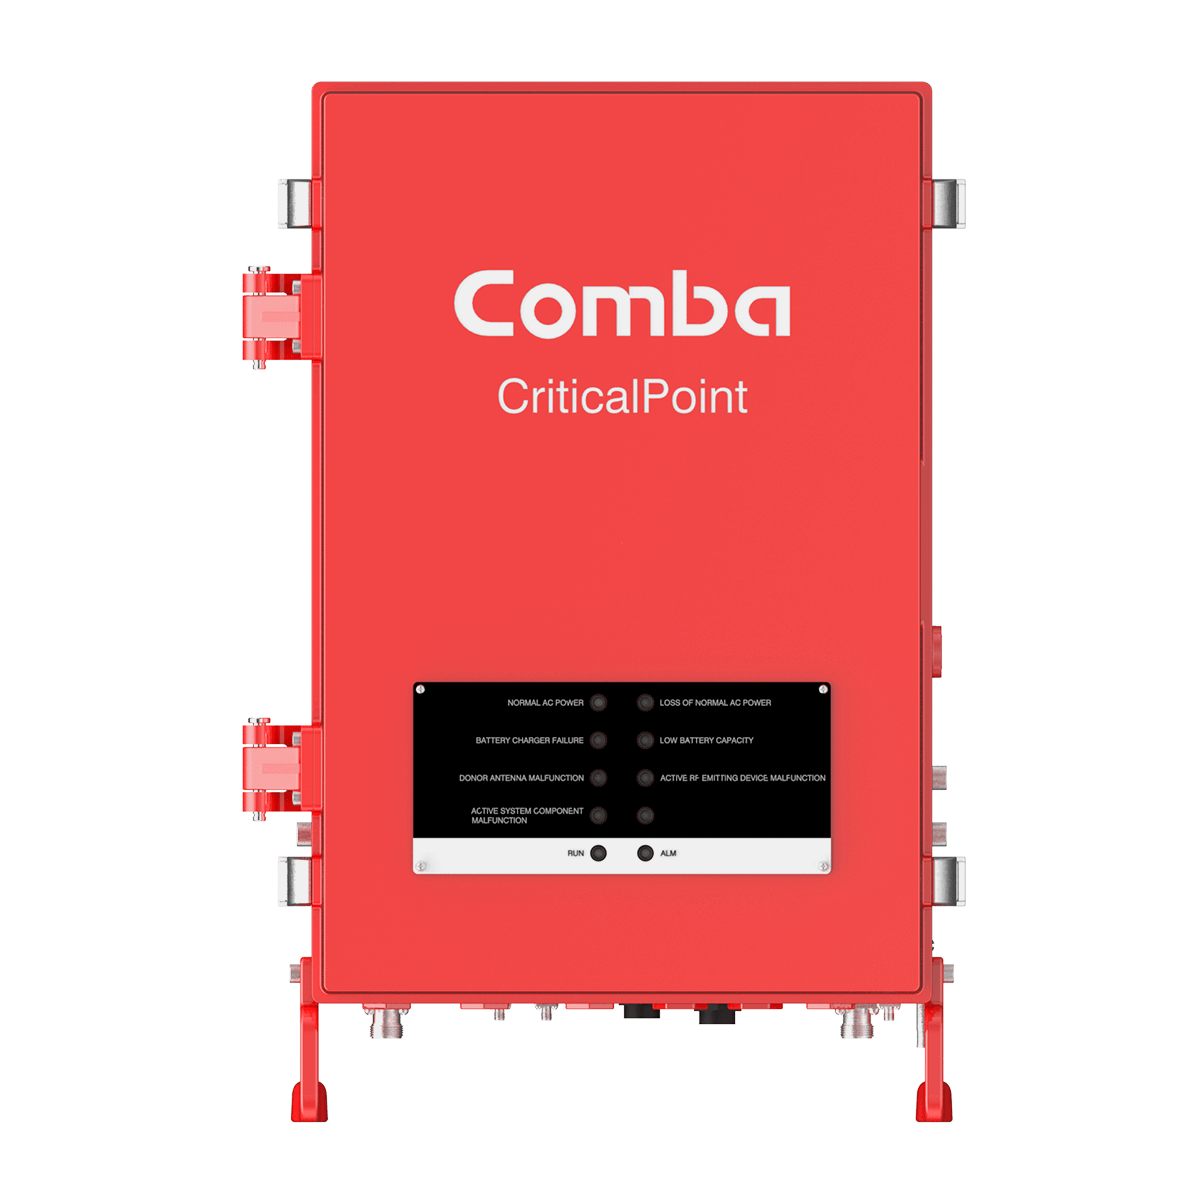 Original Image: Comba – Public Safety Critical Point NG 700/800MHz Dual Band, Class A, 0.5W Remote Unit, S1 configuration, HCAI OSP listed